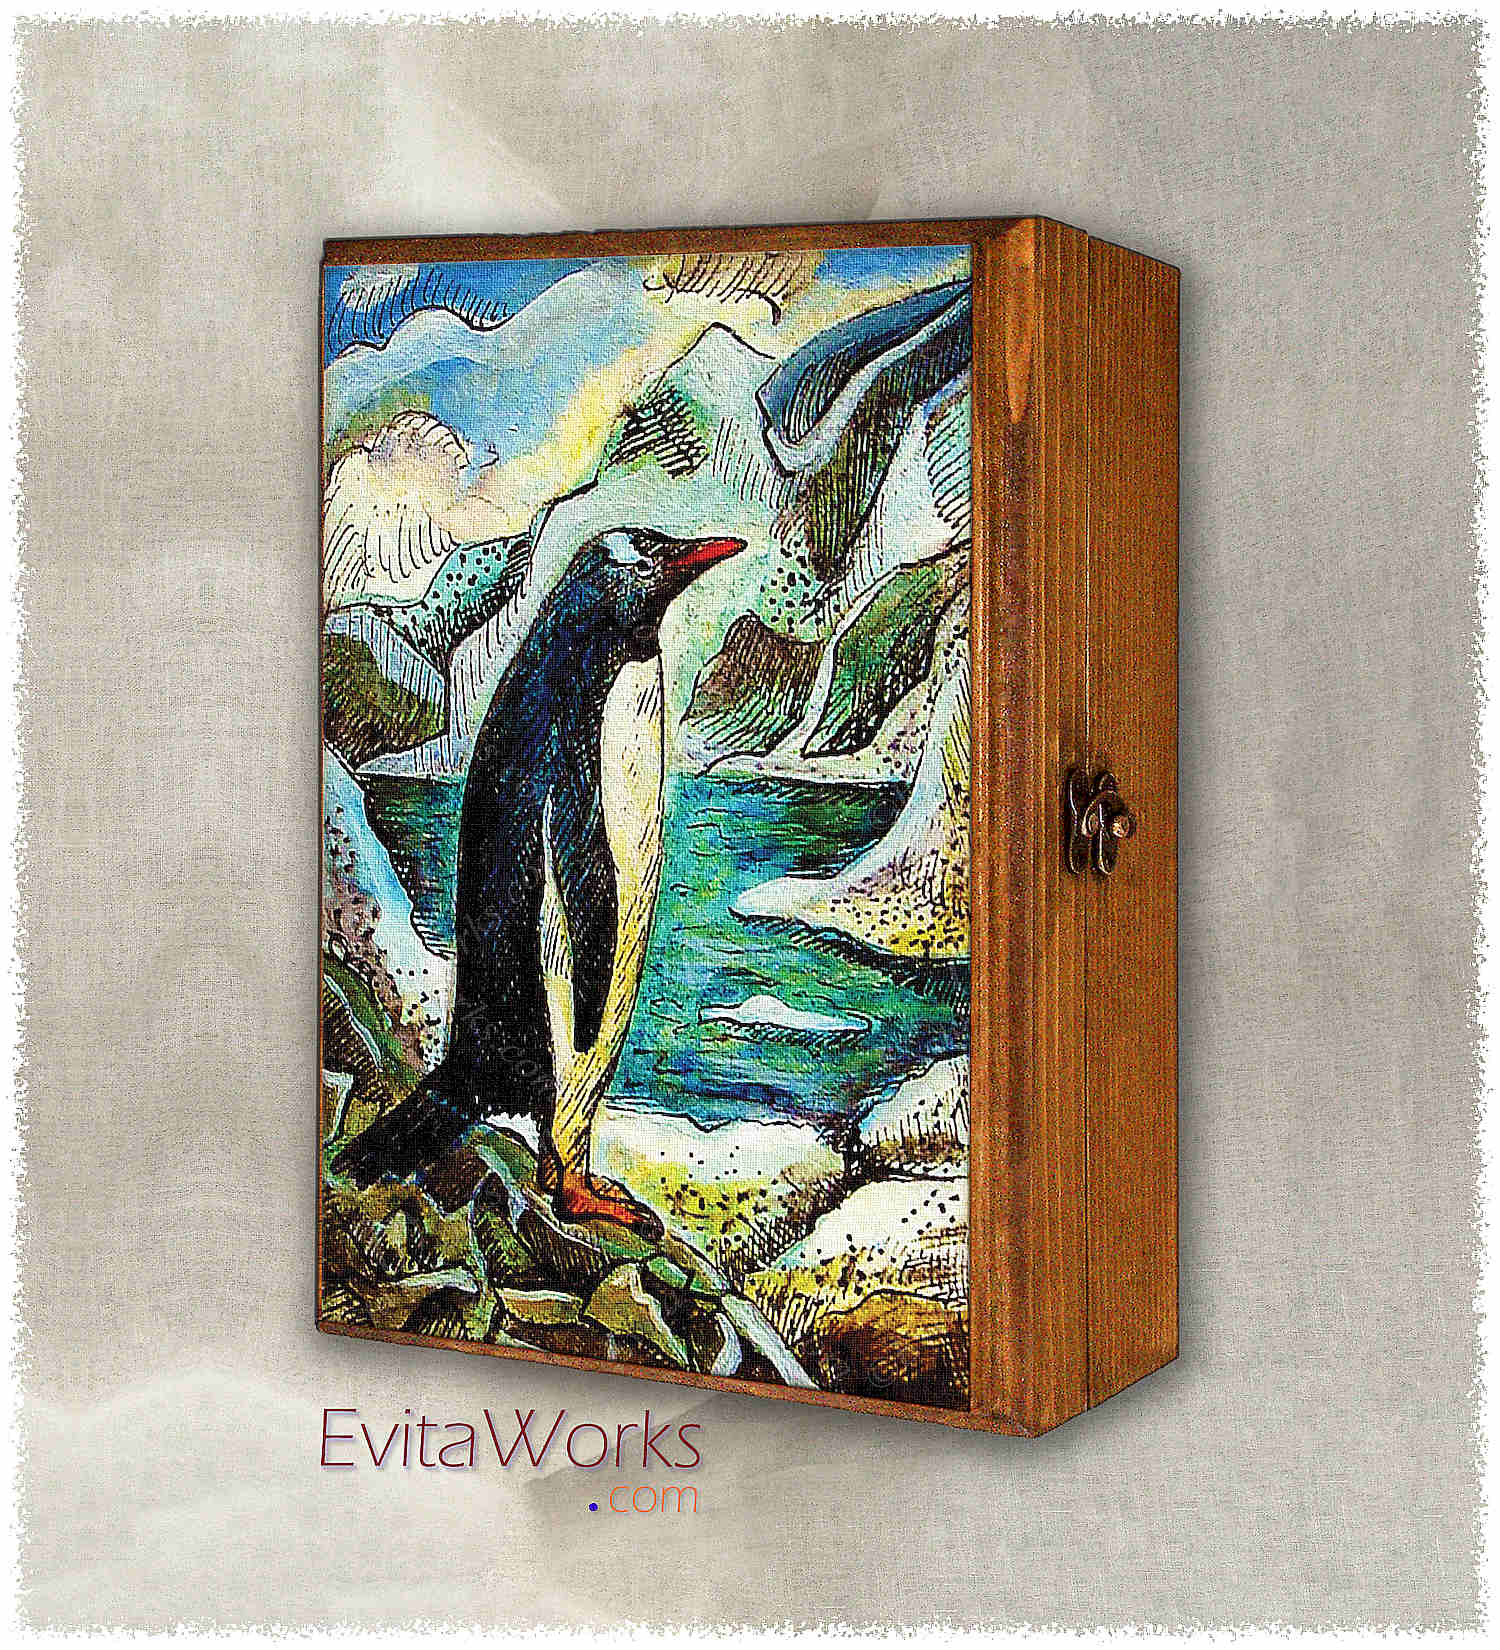 Hit to learn about "Bird in nature illustration 03" on jewelboxes